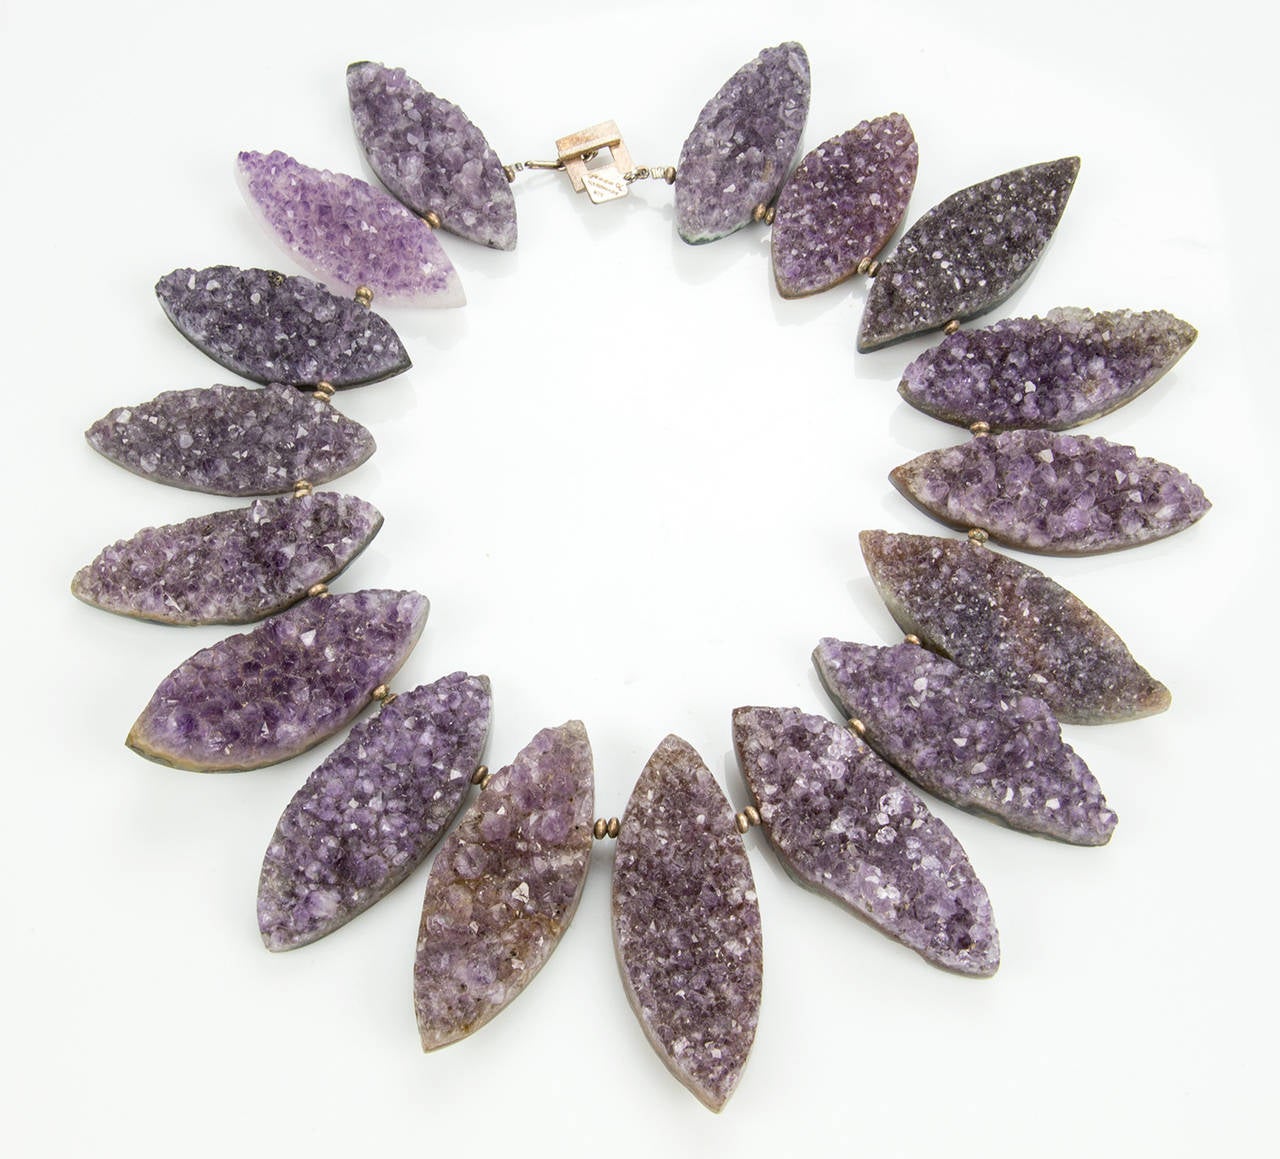 Outstanding Runway Necklace features seventeen Beautiful Genuine Natural Gem Amethyst Druzy Quartz, inter-spaced with Sterling Silver rondelle Beads; Necklace held by a square toggle Sterling Silver Clasp. The tapered Marquise Navette shaped